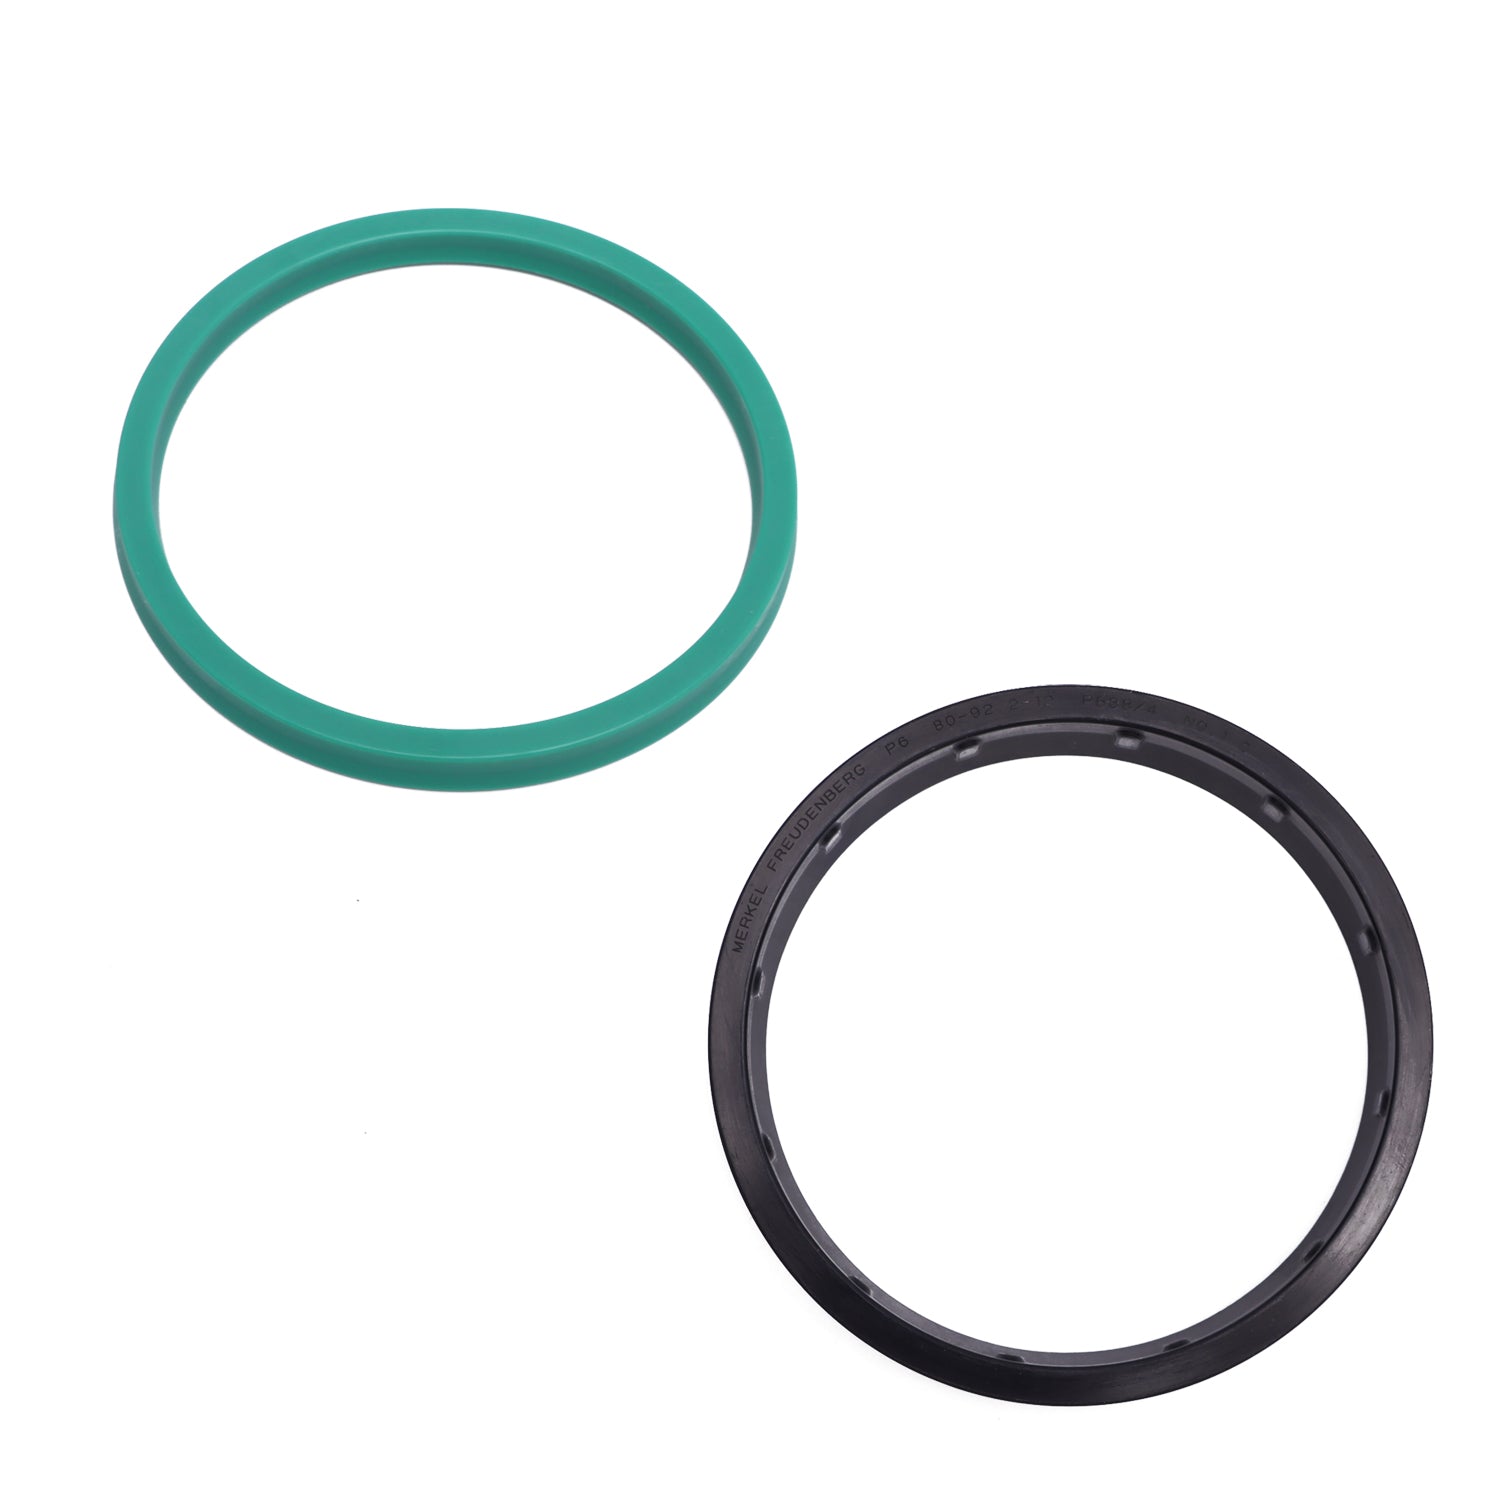 Differential Cylinder 10164038 (DN 120/85) Seal Kit for Schwing Truck-Mounted Concrete Pump, Main Hydraulic Oil Cylinder Sealing Kit for Schwing Stetter Boom Pump. - KUDUPARTS